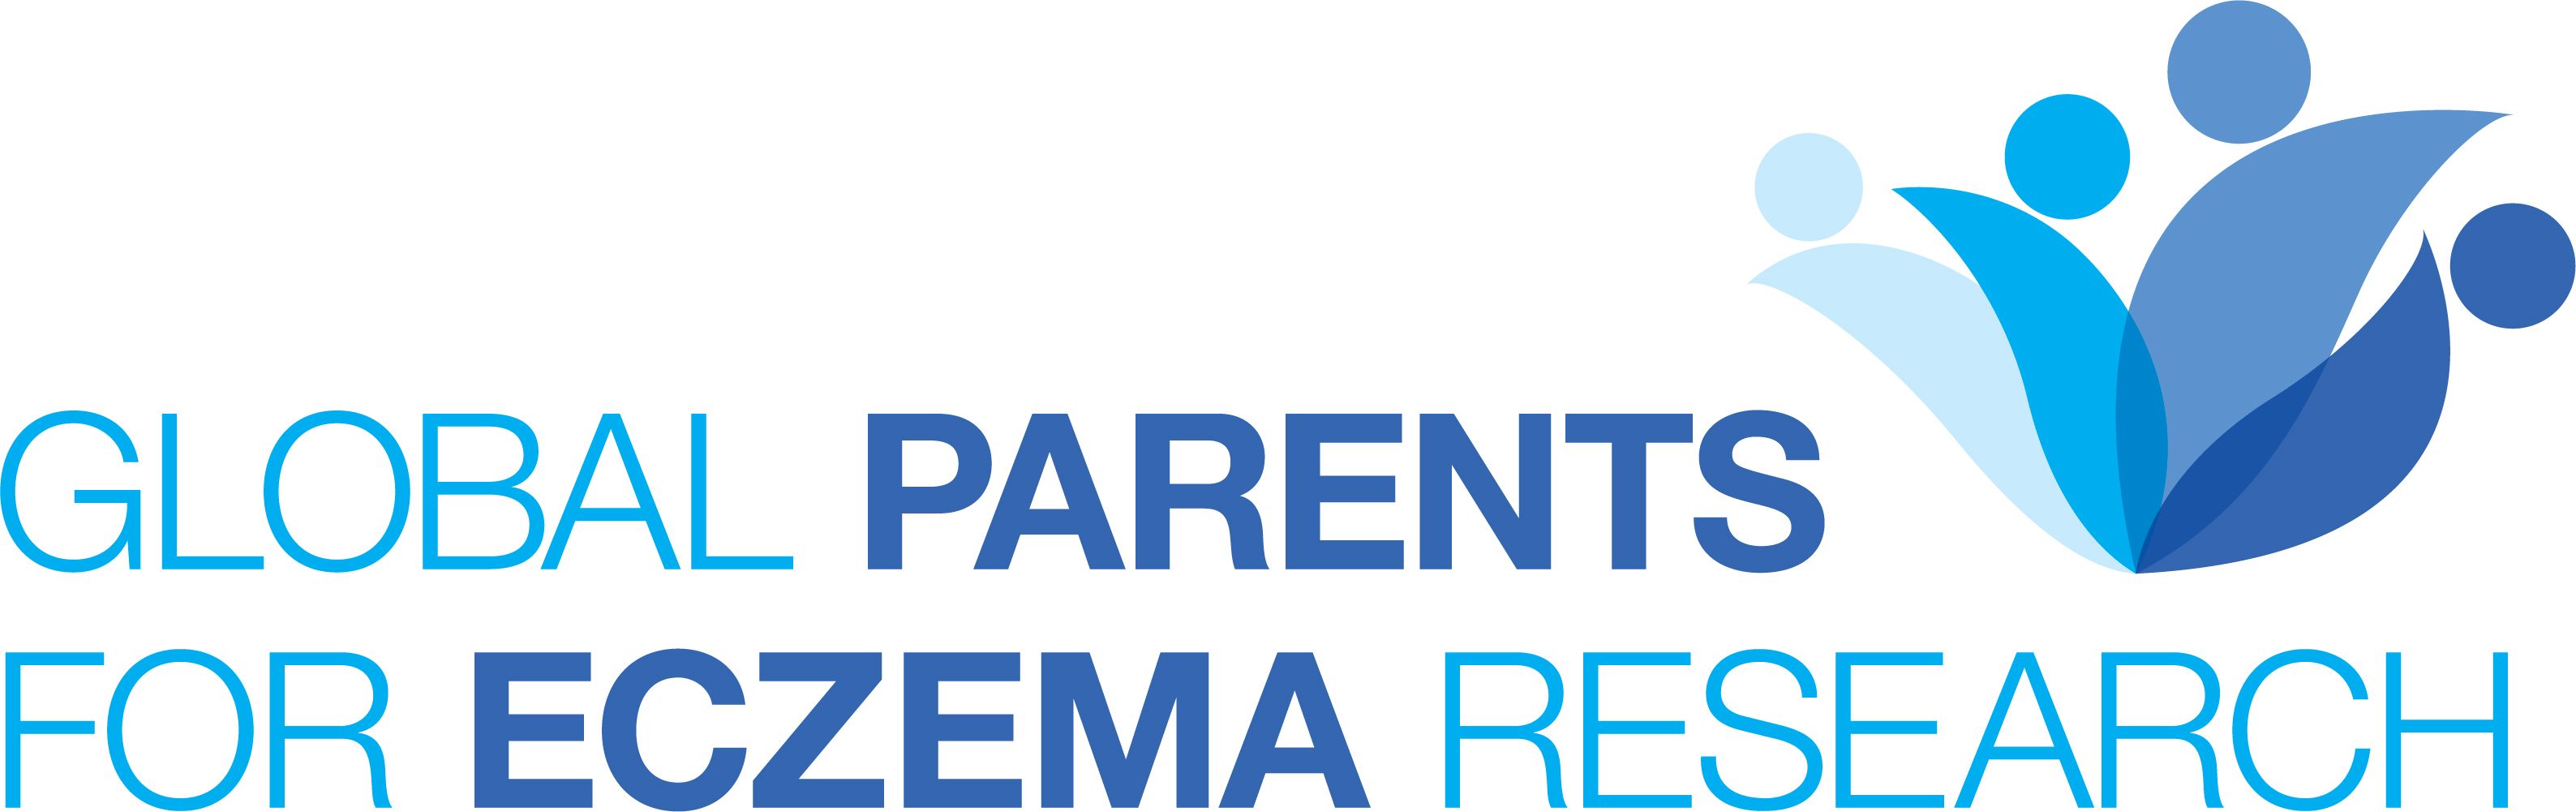 Global Parents for Eczema Research logo